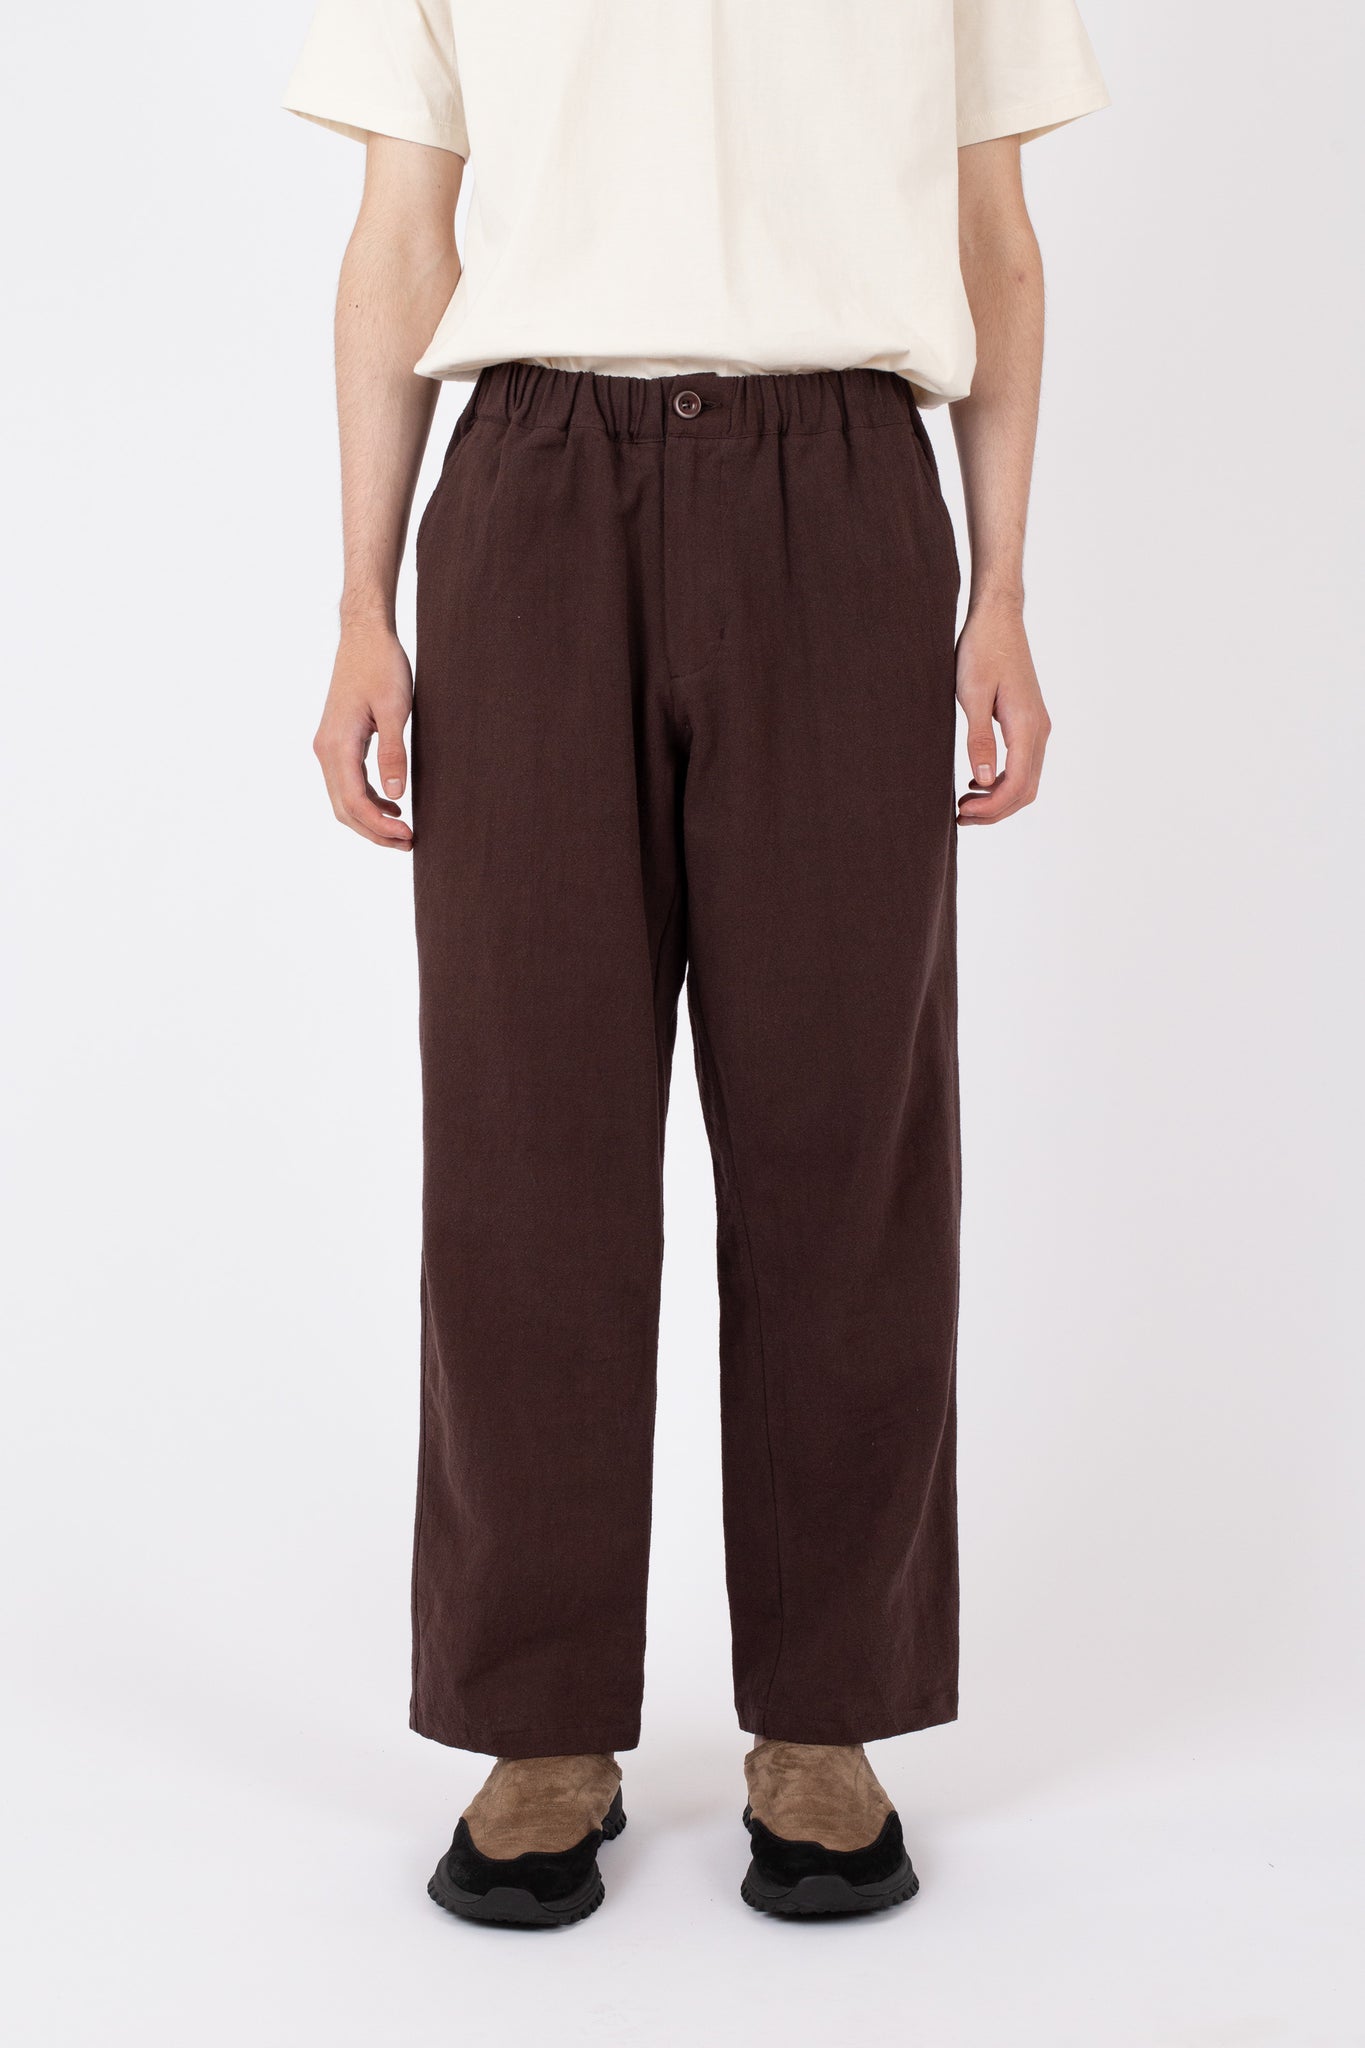 Relaxed Pant, Hachiko, Espresso